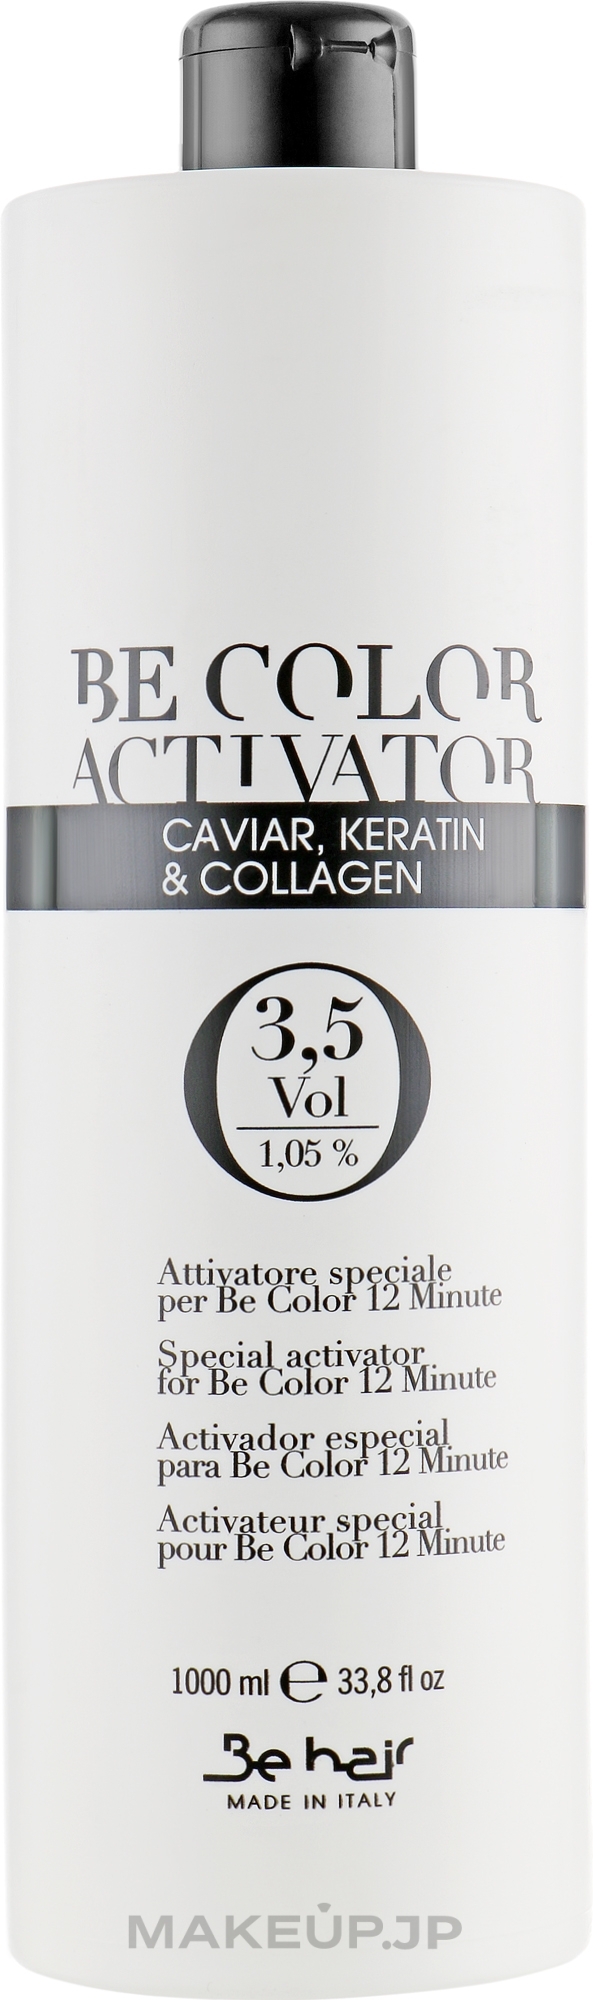 Oxidizer 1,05% - Be Hair Be Color Activator with Caviar Keratin and Collagen — photo 1000 ml